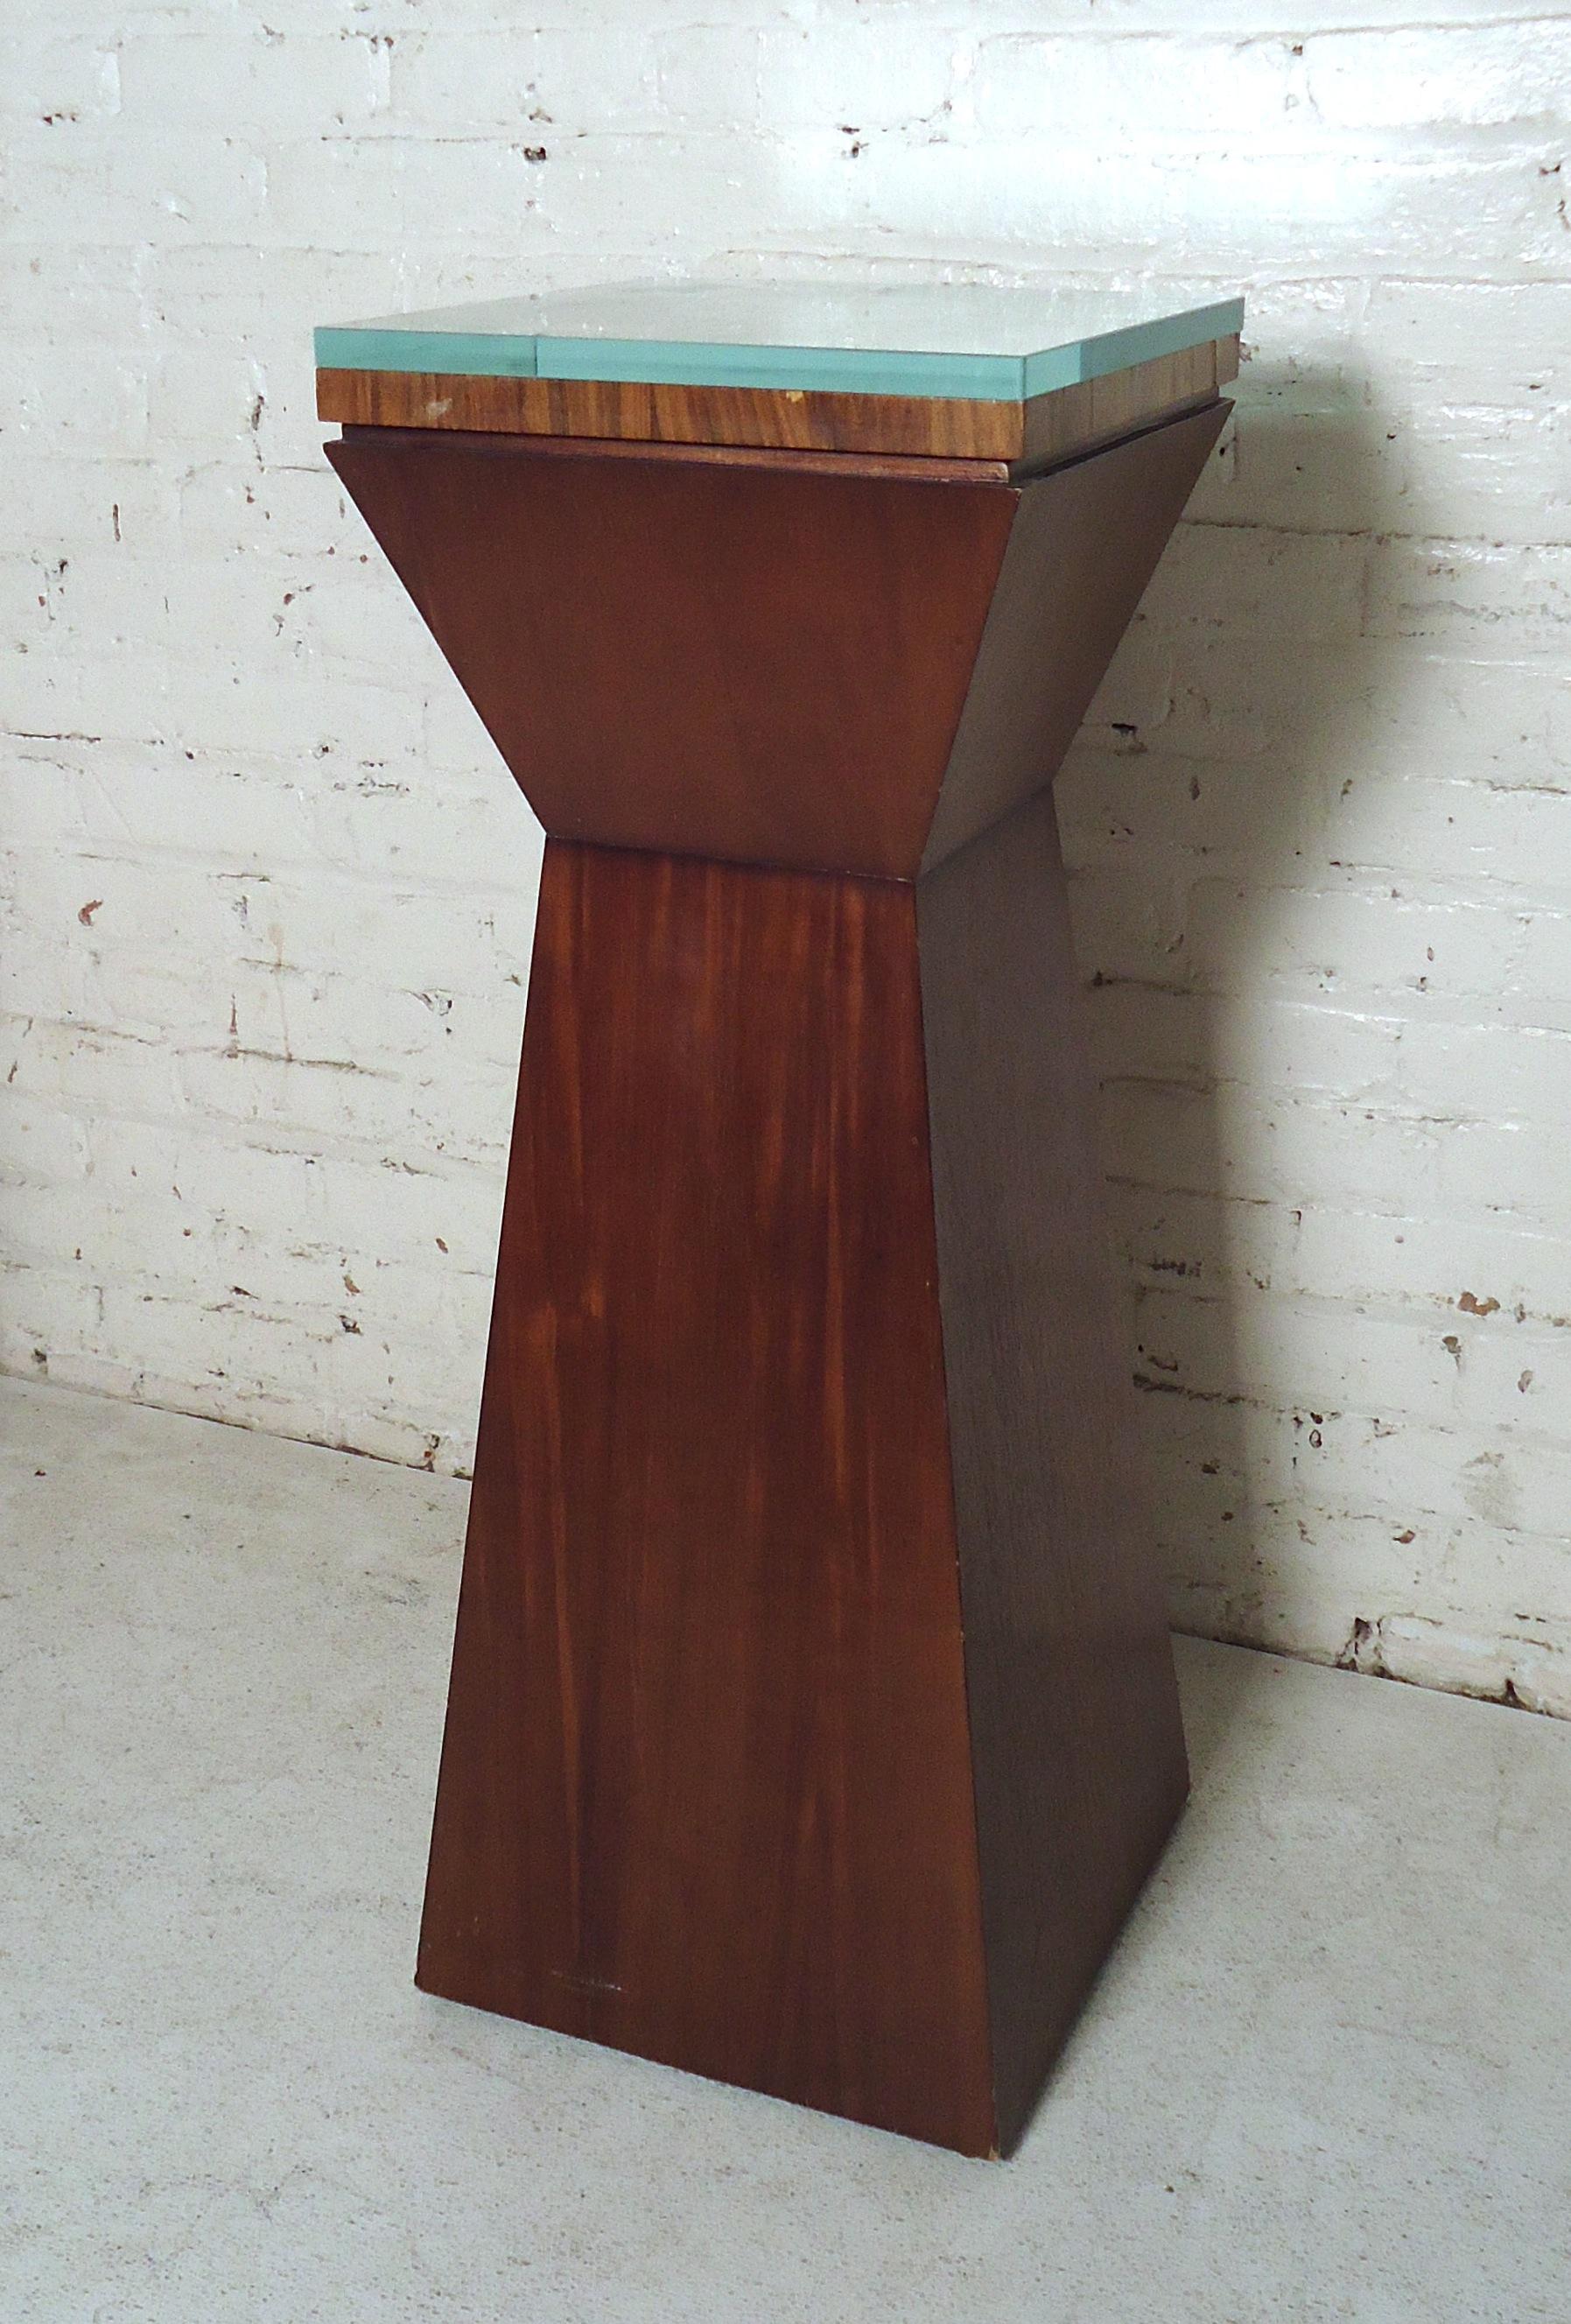 This is a sleek wooden pedestal that can be used for lamps, plants or sculptures featured with a glass top.
(Please confirm item location - NY or NJ - with dealer).